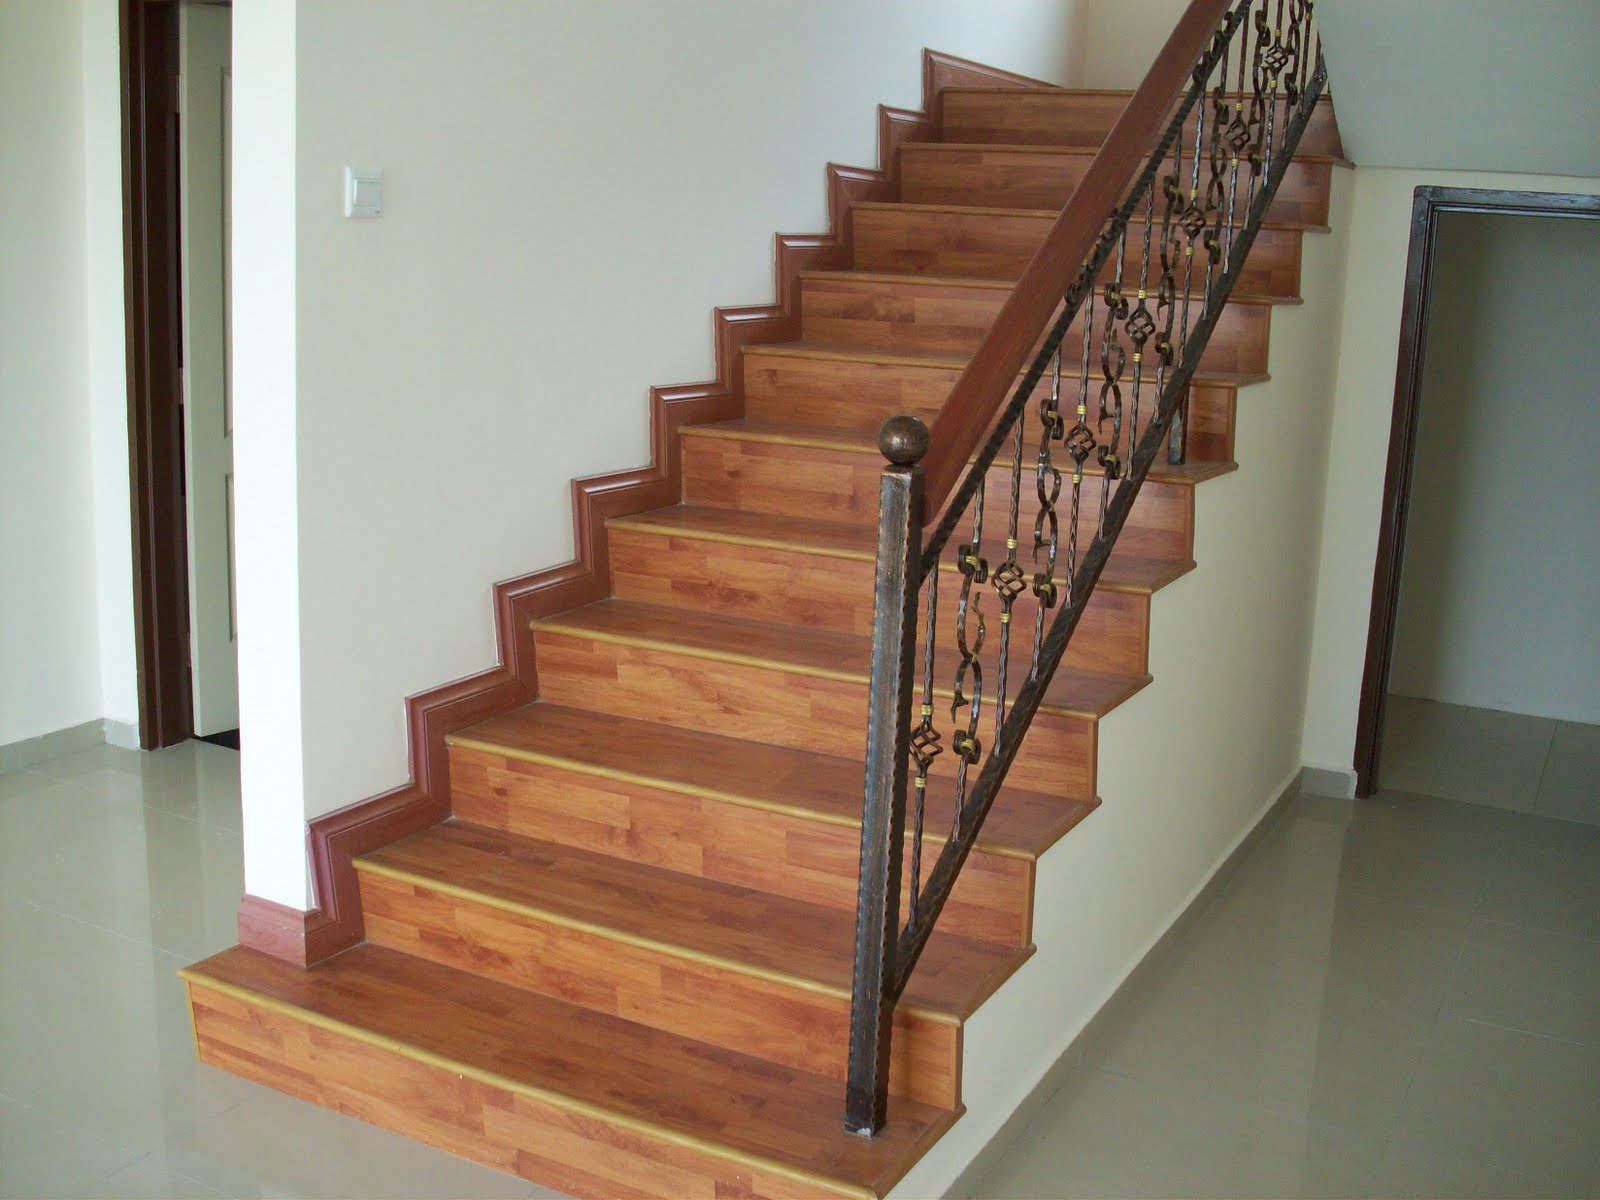 How To Install Wood Flooring On Stairs, How To Lay Wooden Flooring On Stairs